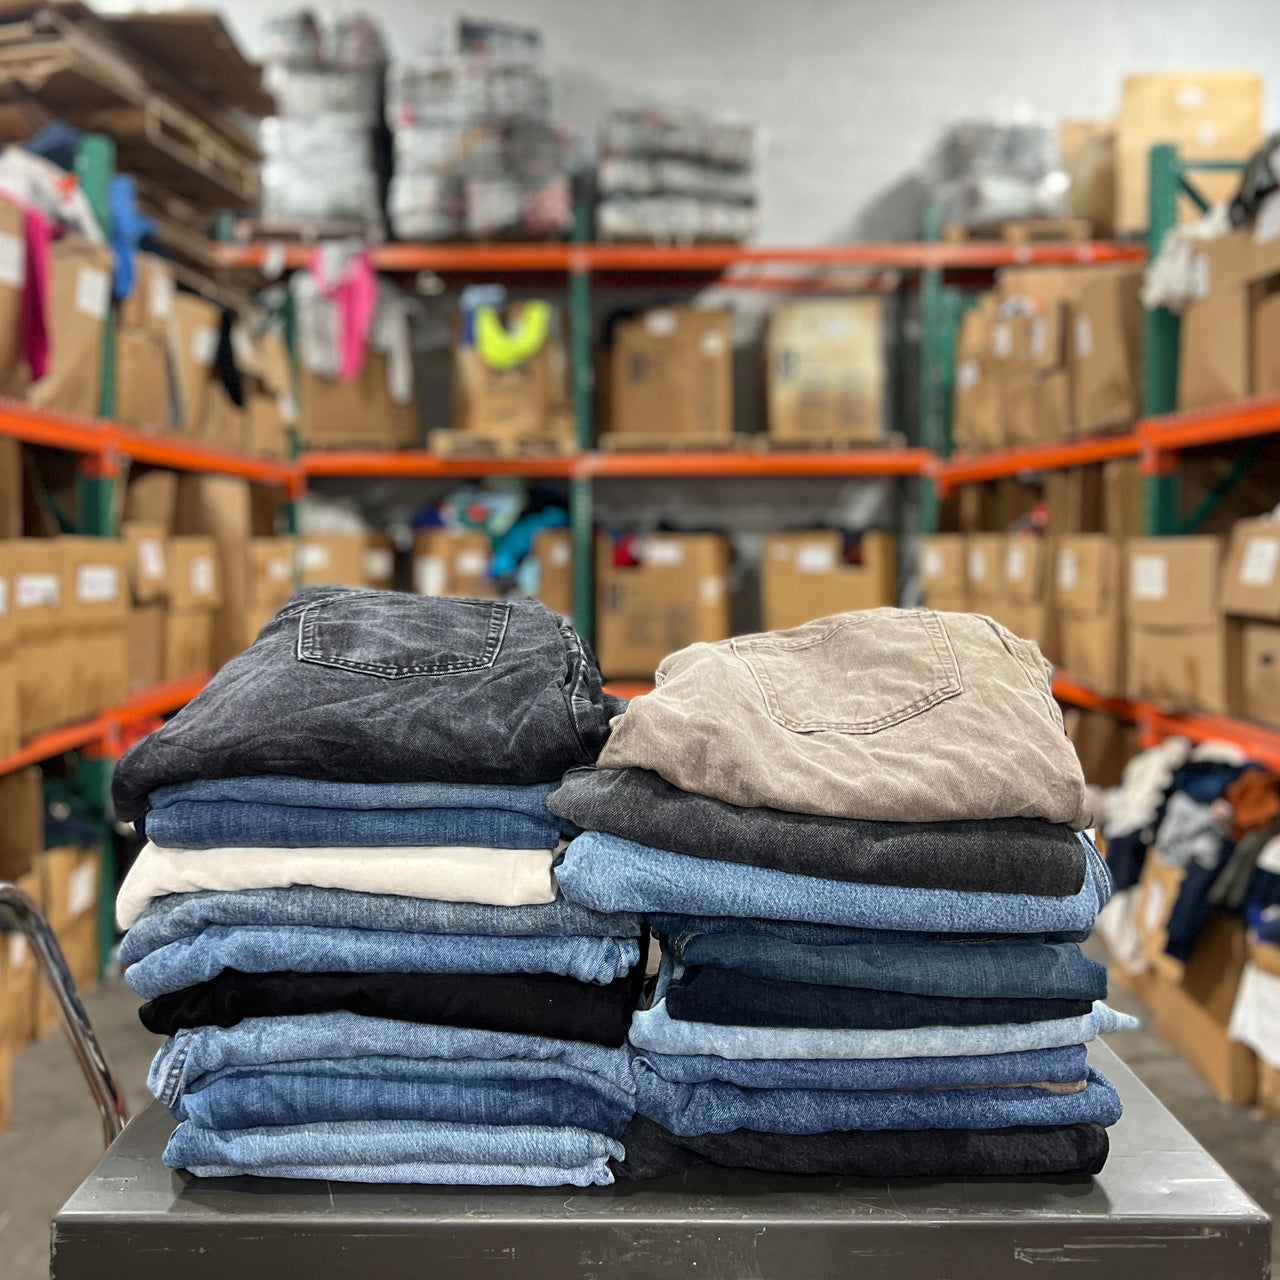 Wholesale Levi's and Wrangler Jeans